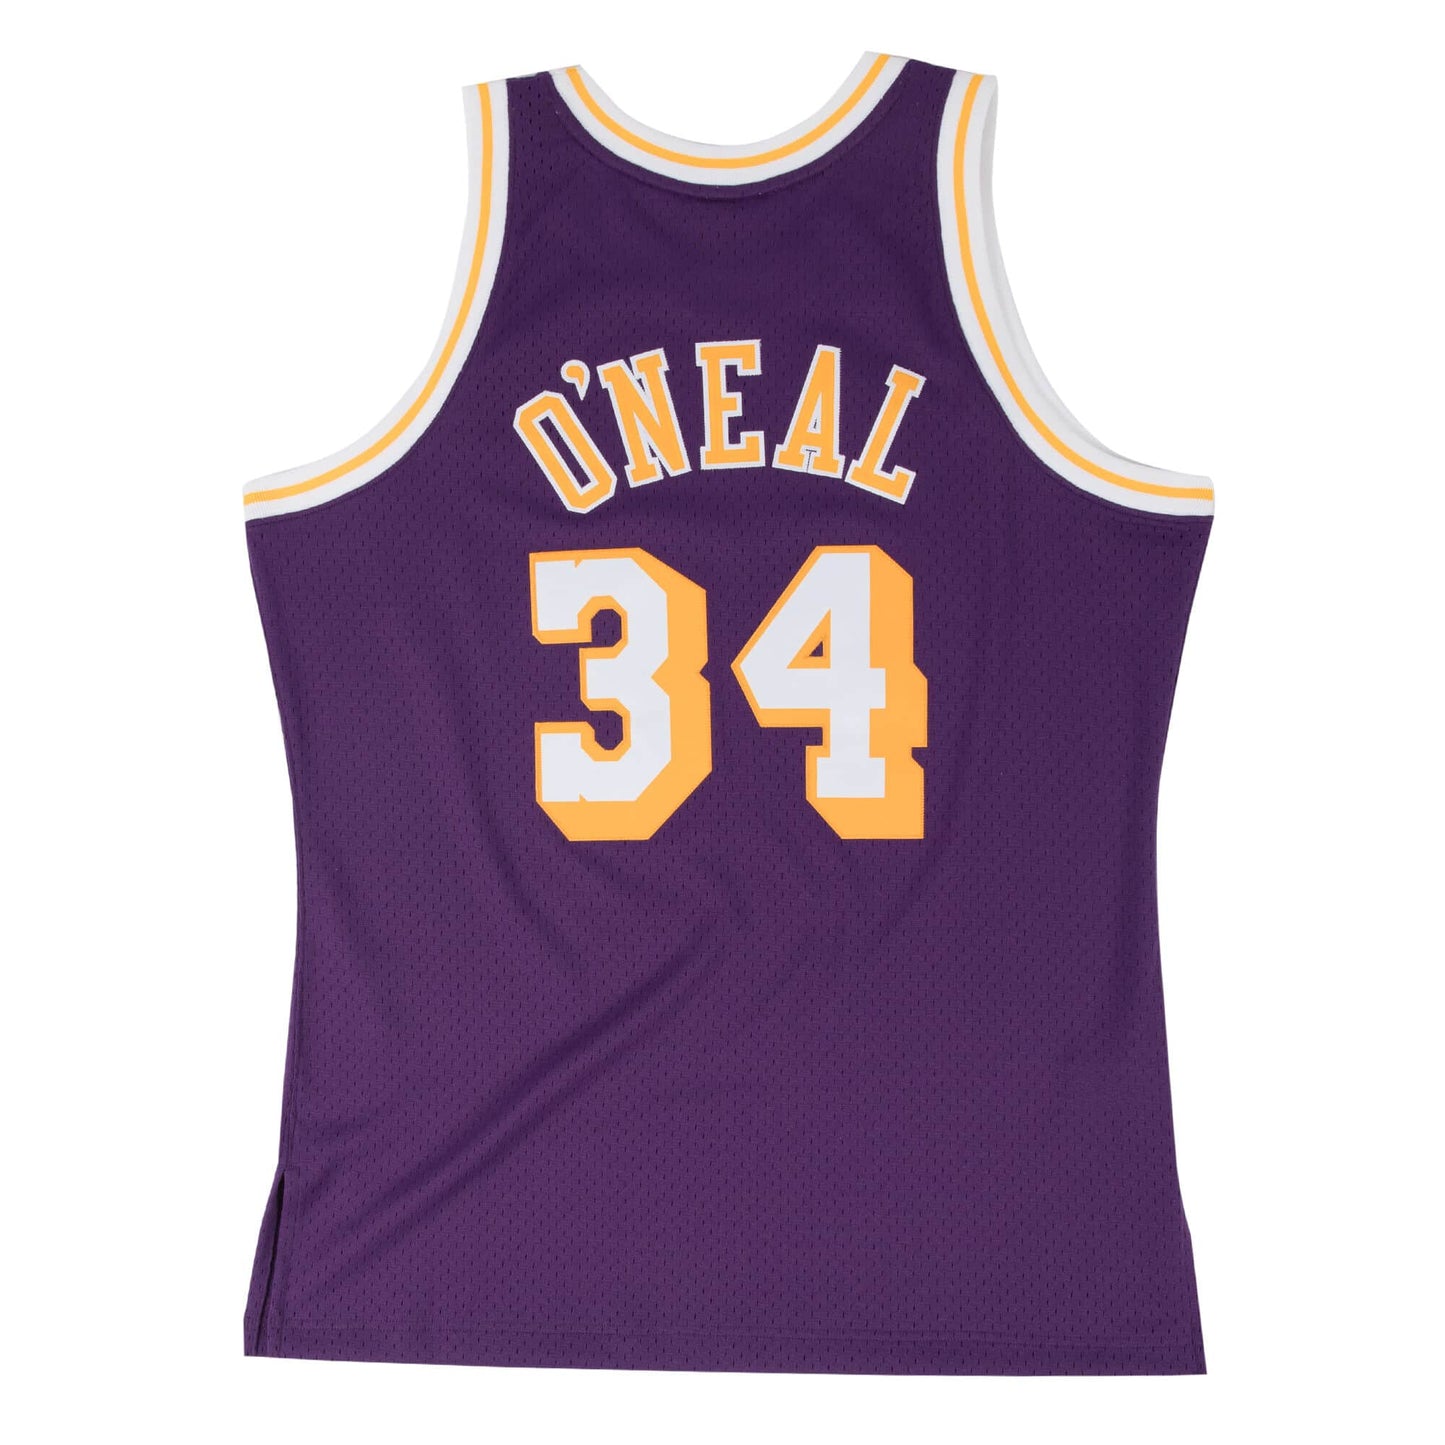 Los Angeles Lakers Shaquille O'Neal Mitchell and Ness Swingman Jersey - Purple (1996-97)